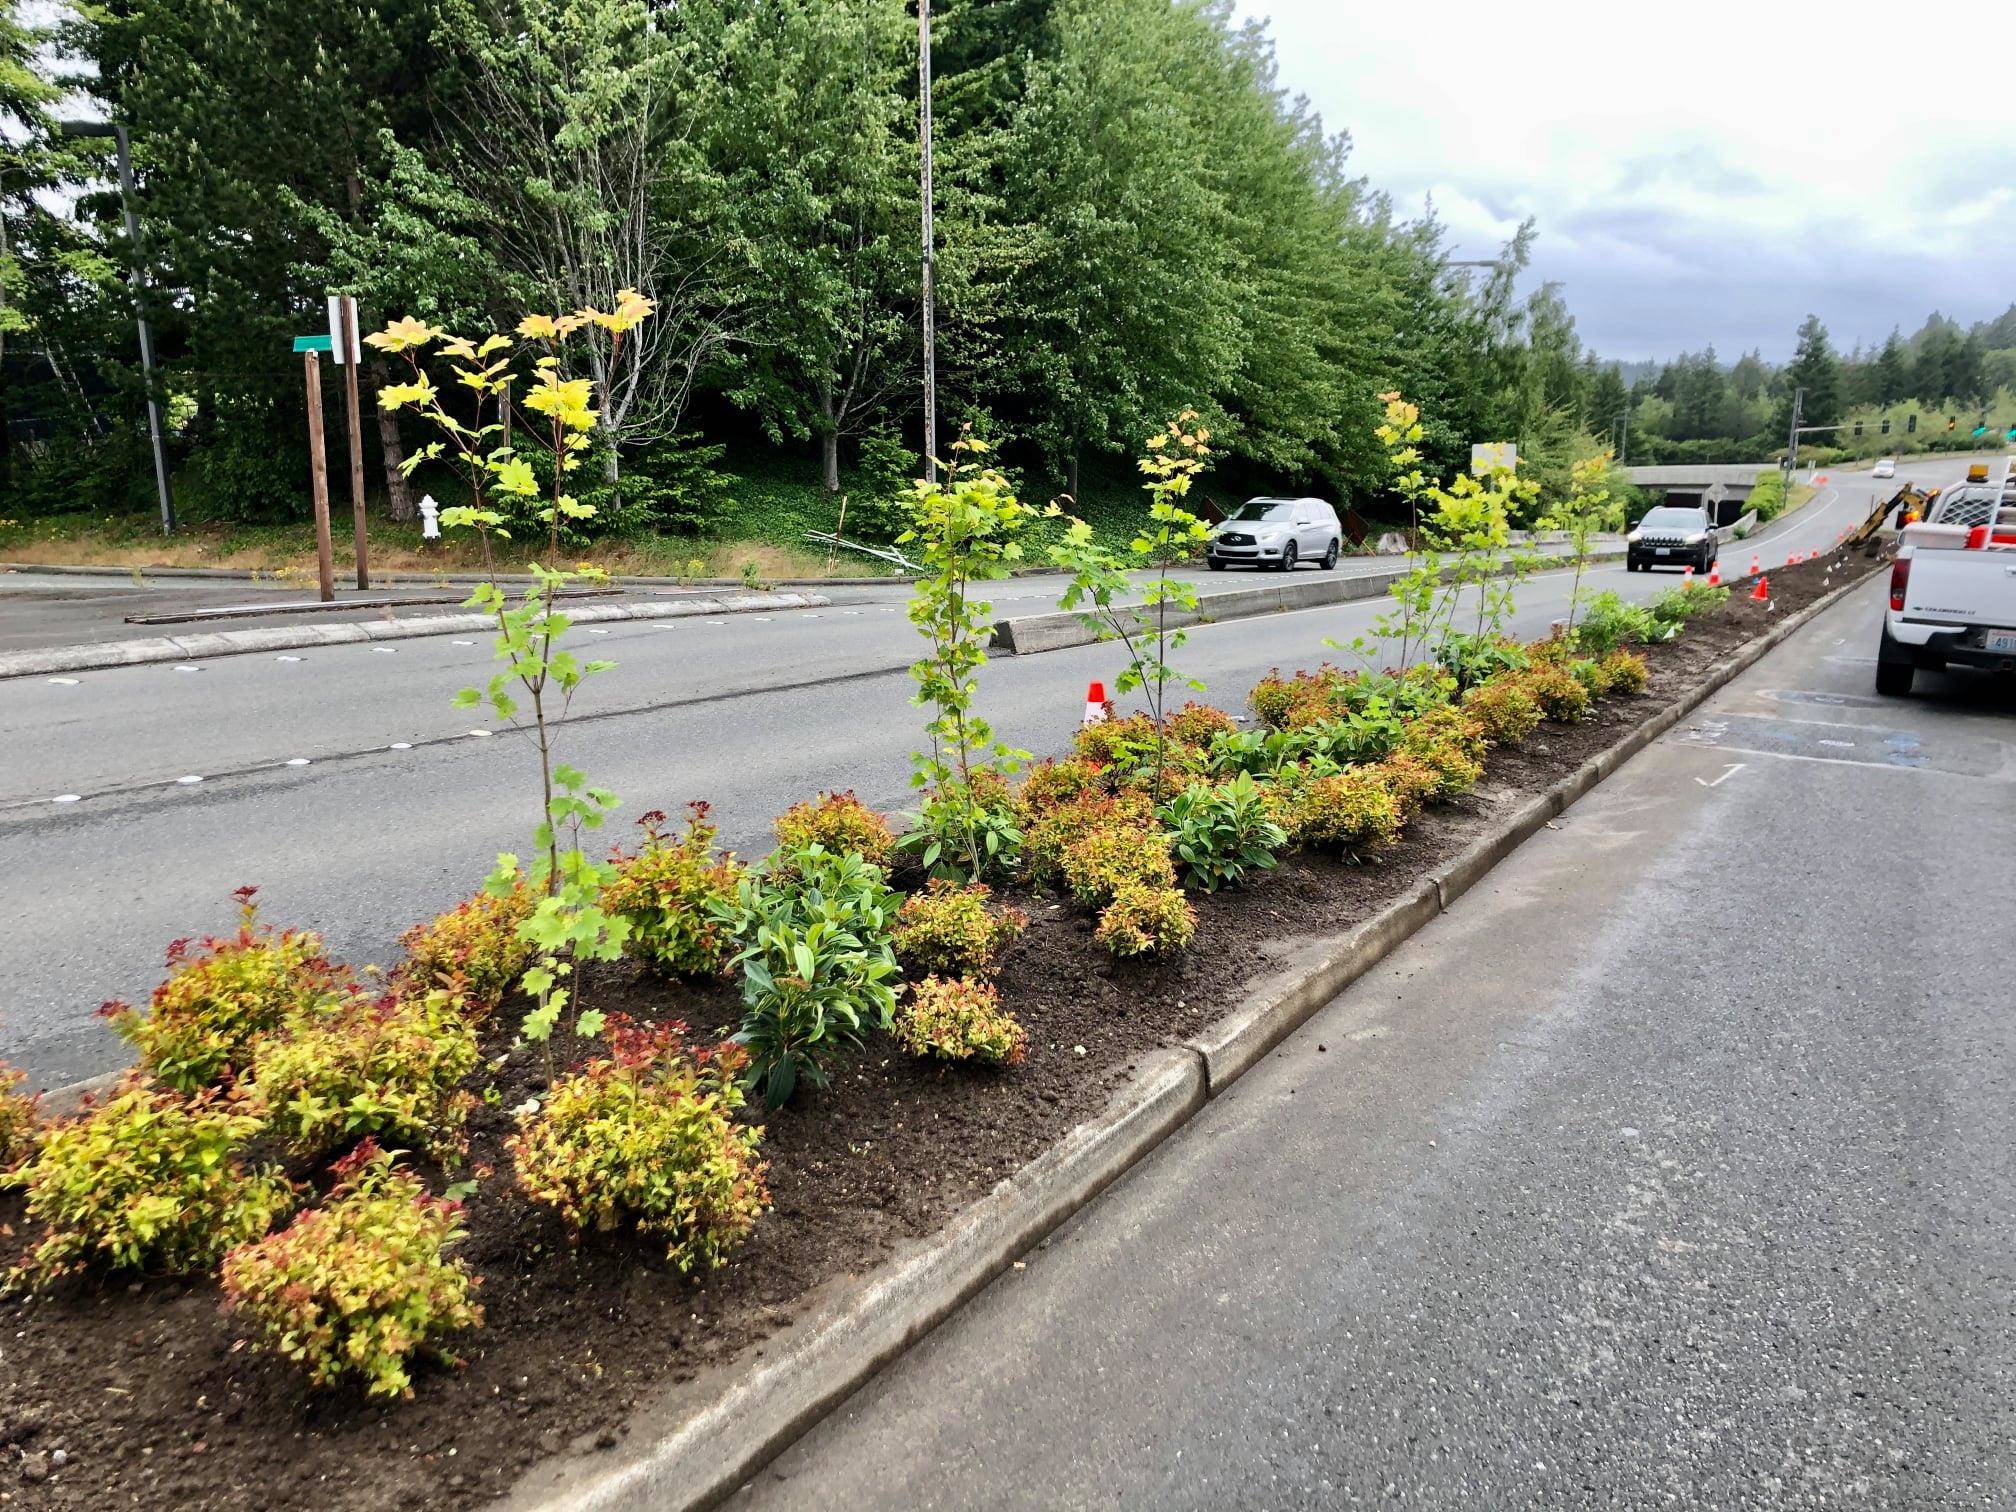 City crews recently repaired irrigation, added more than 50 yards of soil and planted nearly 2,000 plants within the median of Island Crest Way. Photo courtesy of the City of Mercer Island